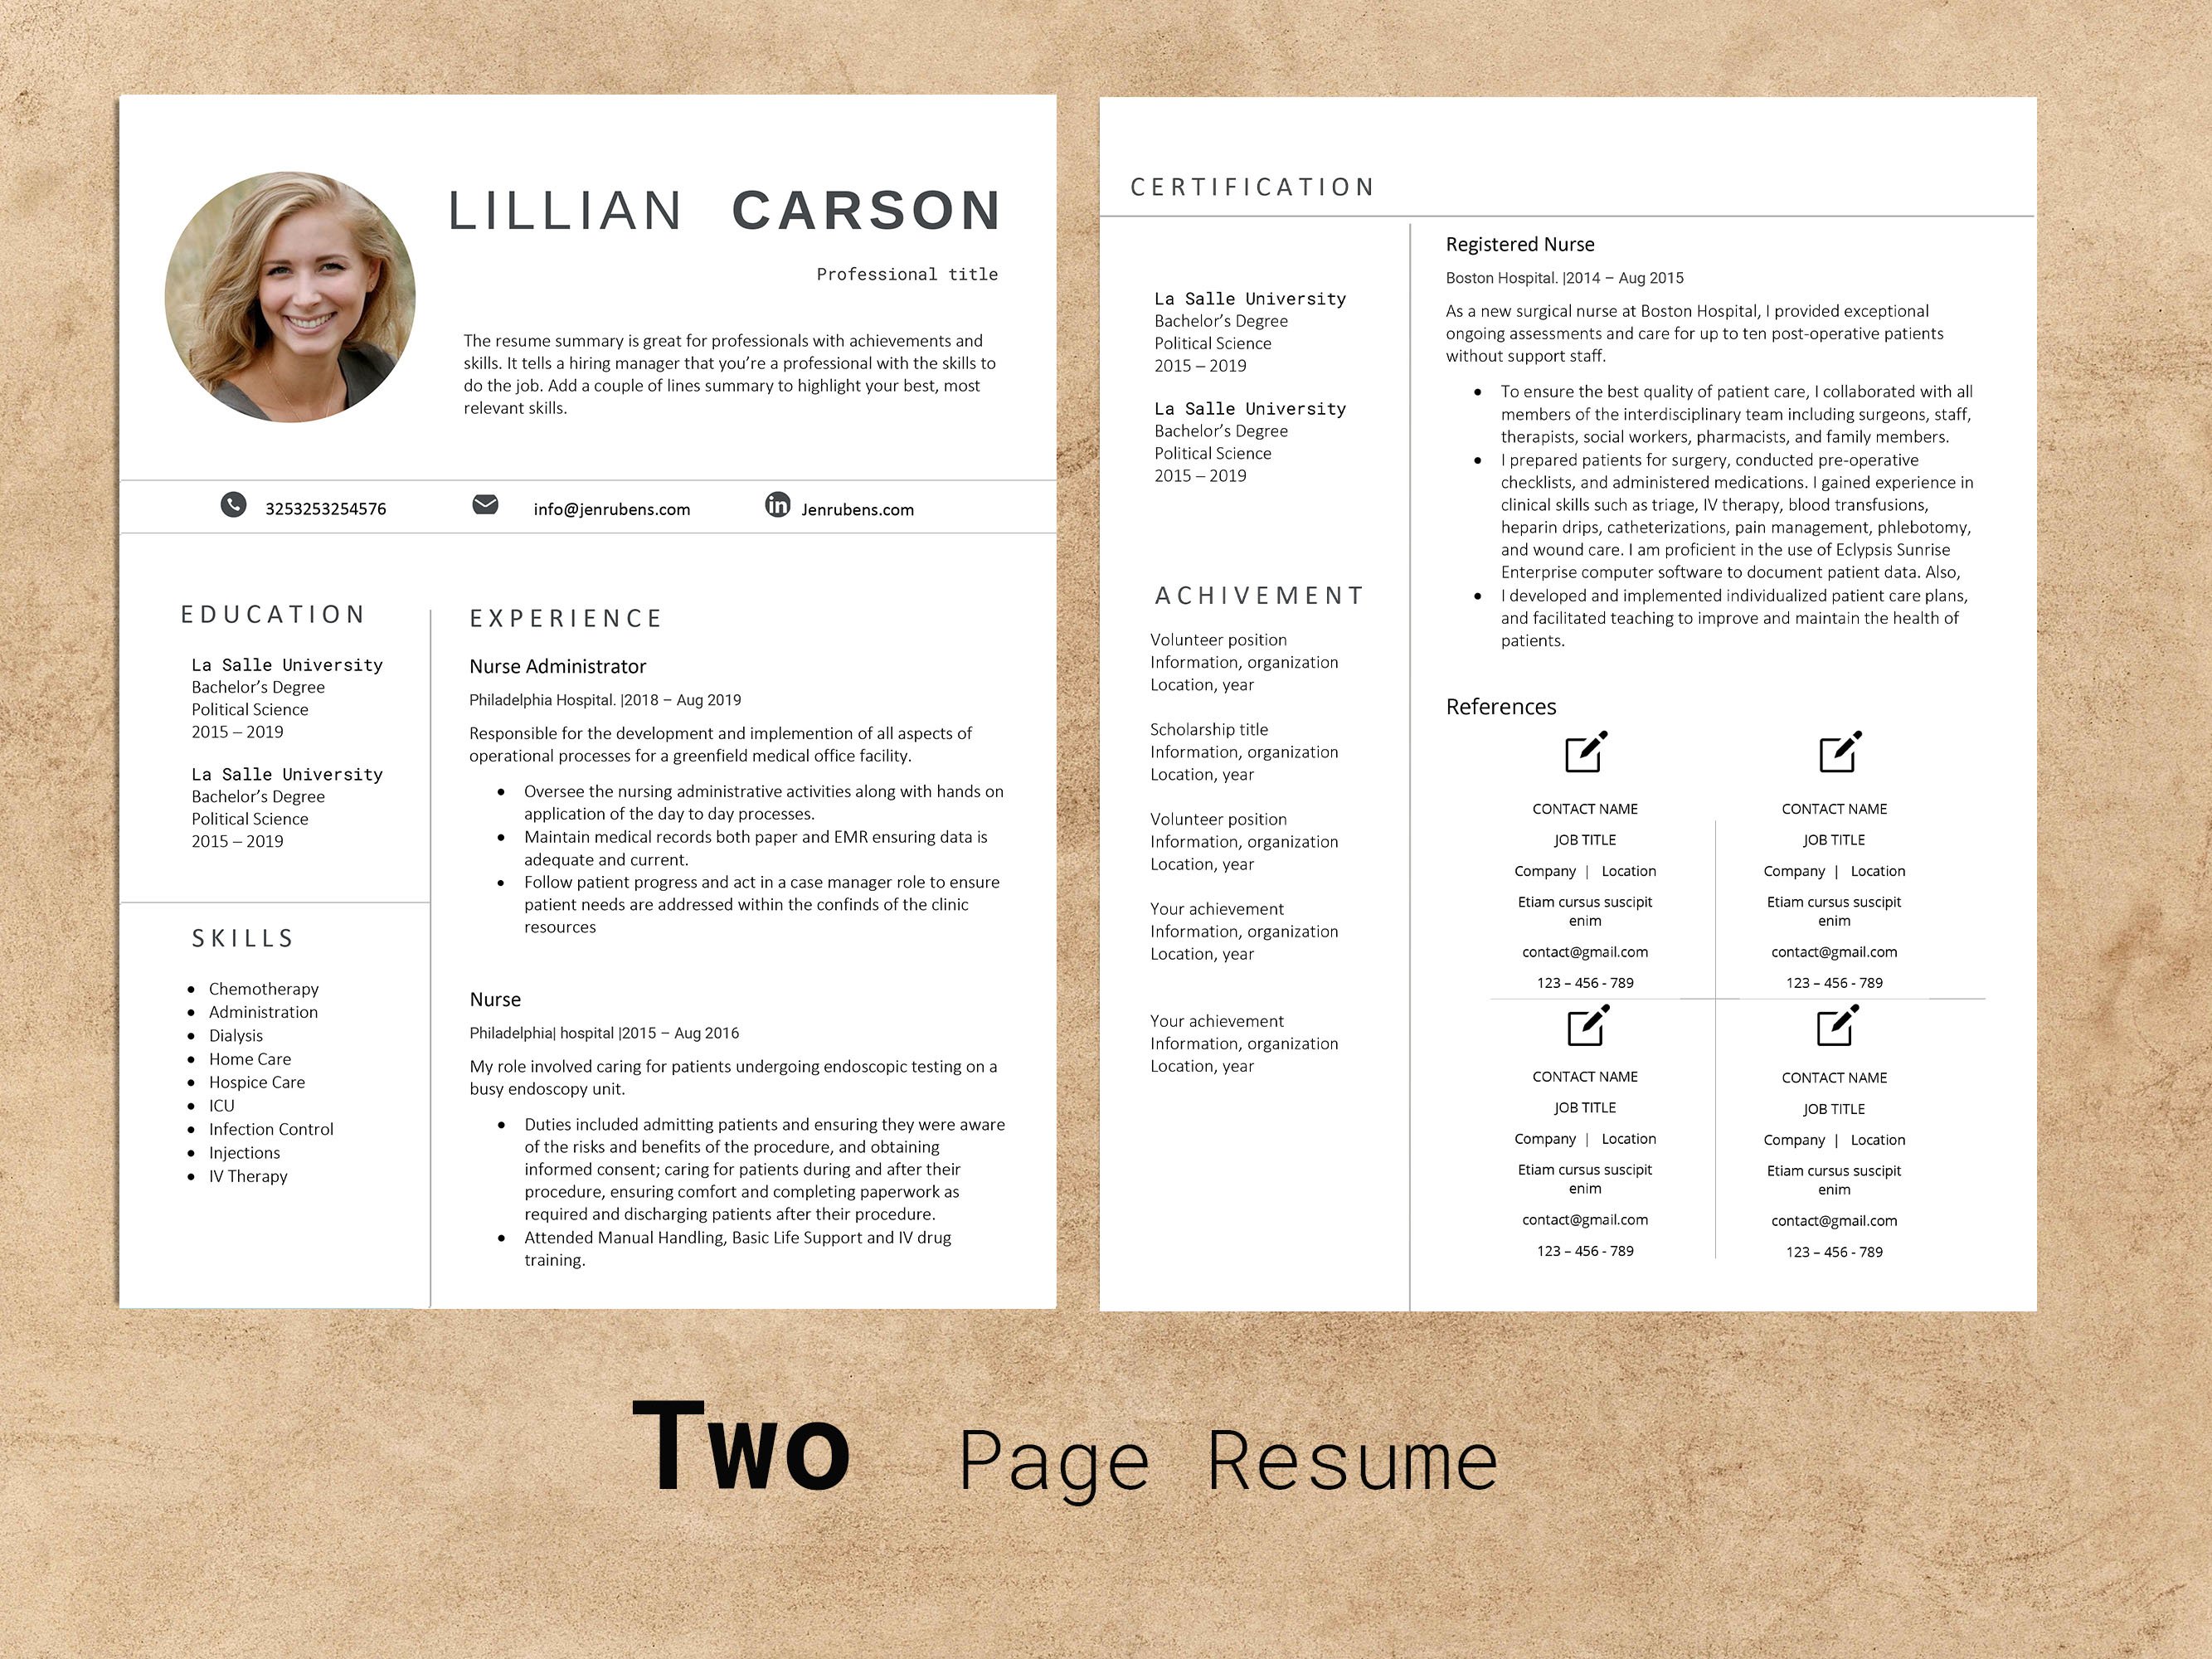 Sorority resume template word & CV preview image.